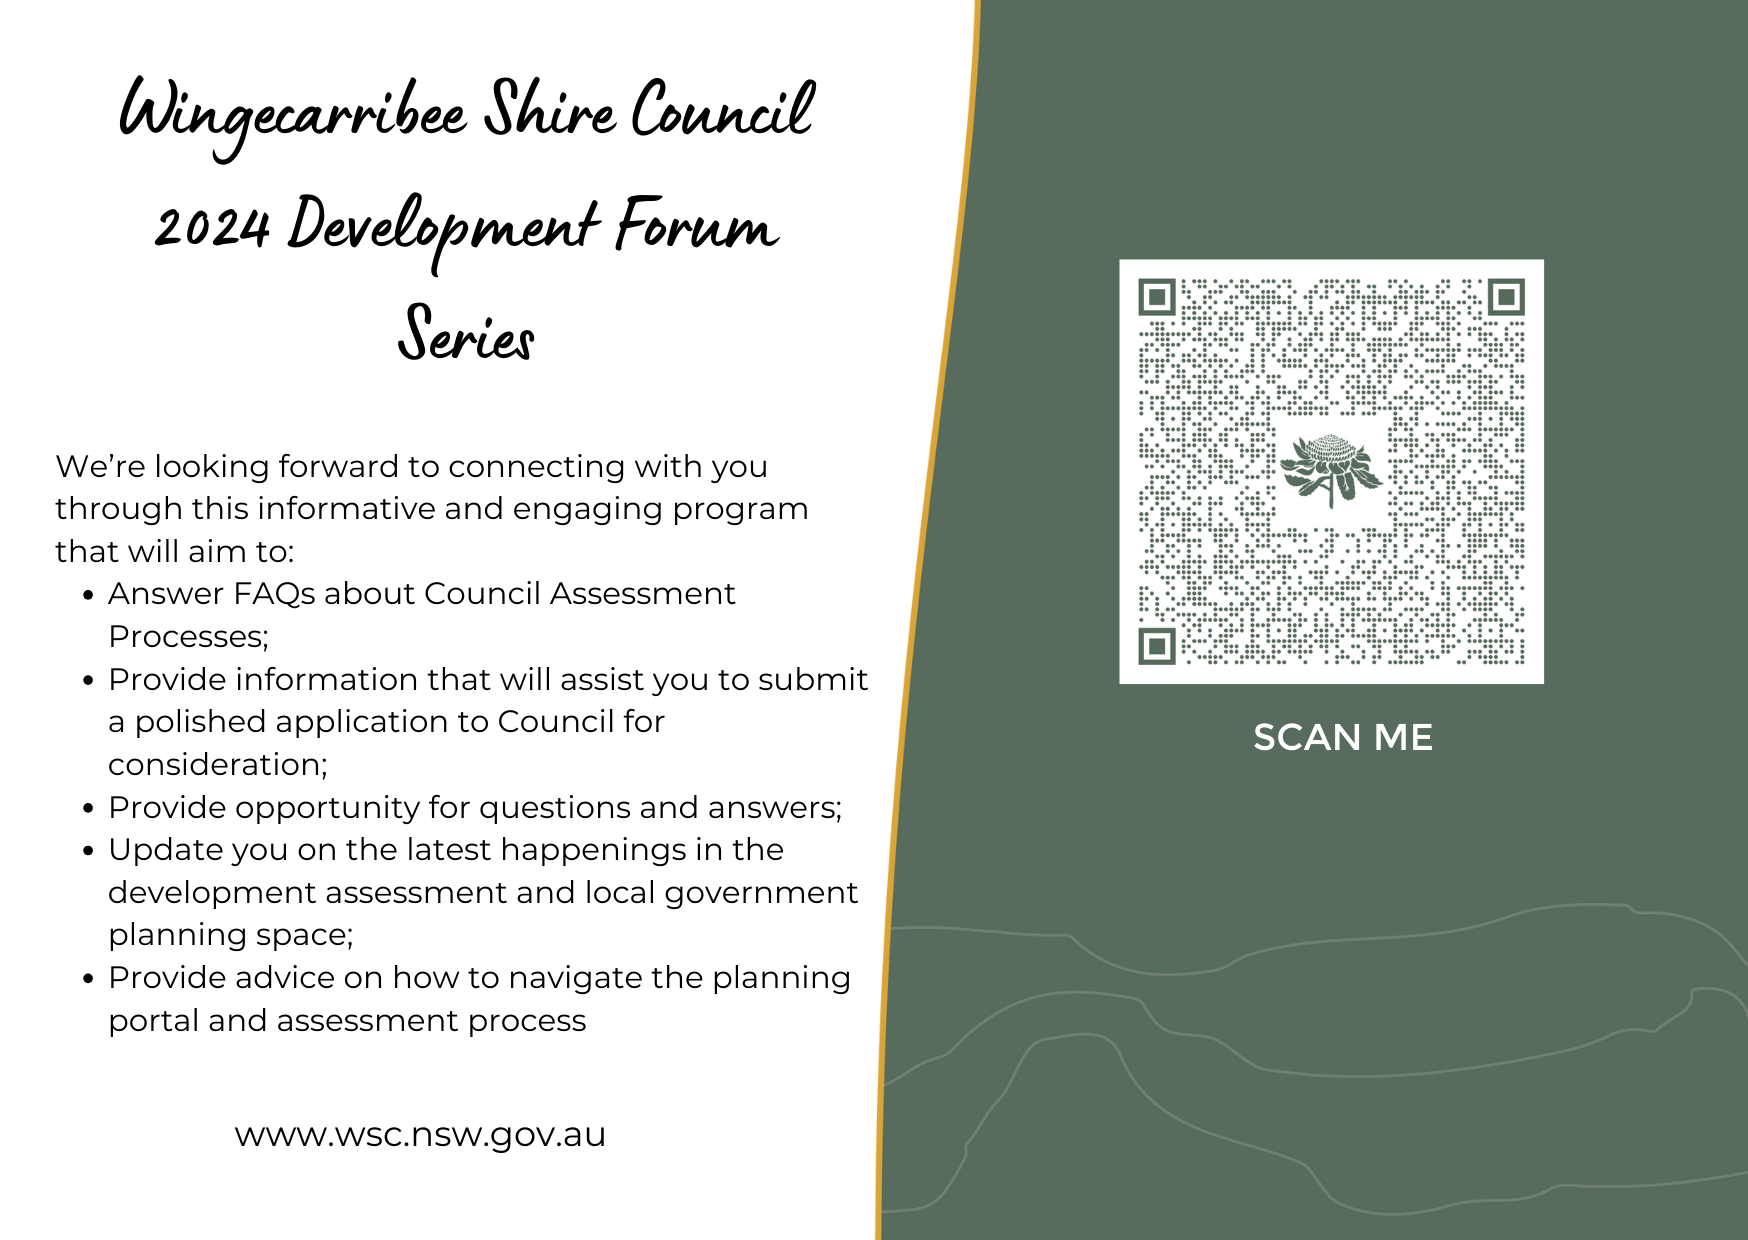 Development Forum Series flyer with event details for 6 and 13 March